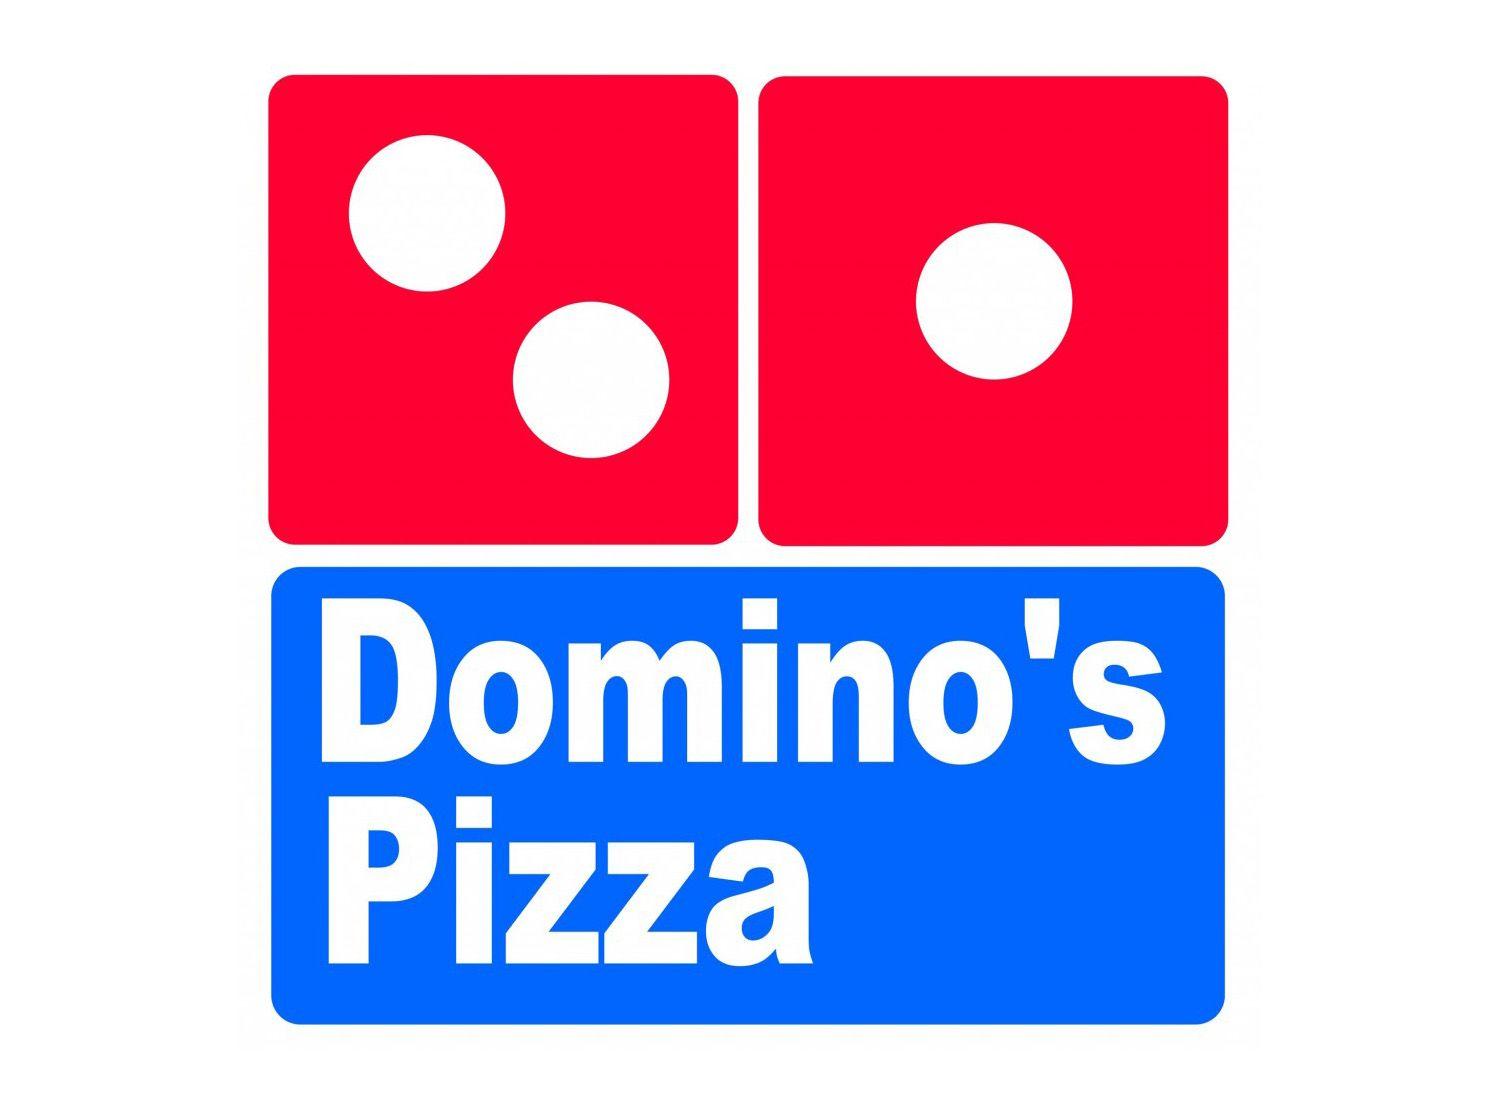 Old Domino's Pizza Logo - Domino's Logo, Domino's Symbol, Meaning, History and Evolution